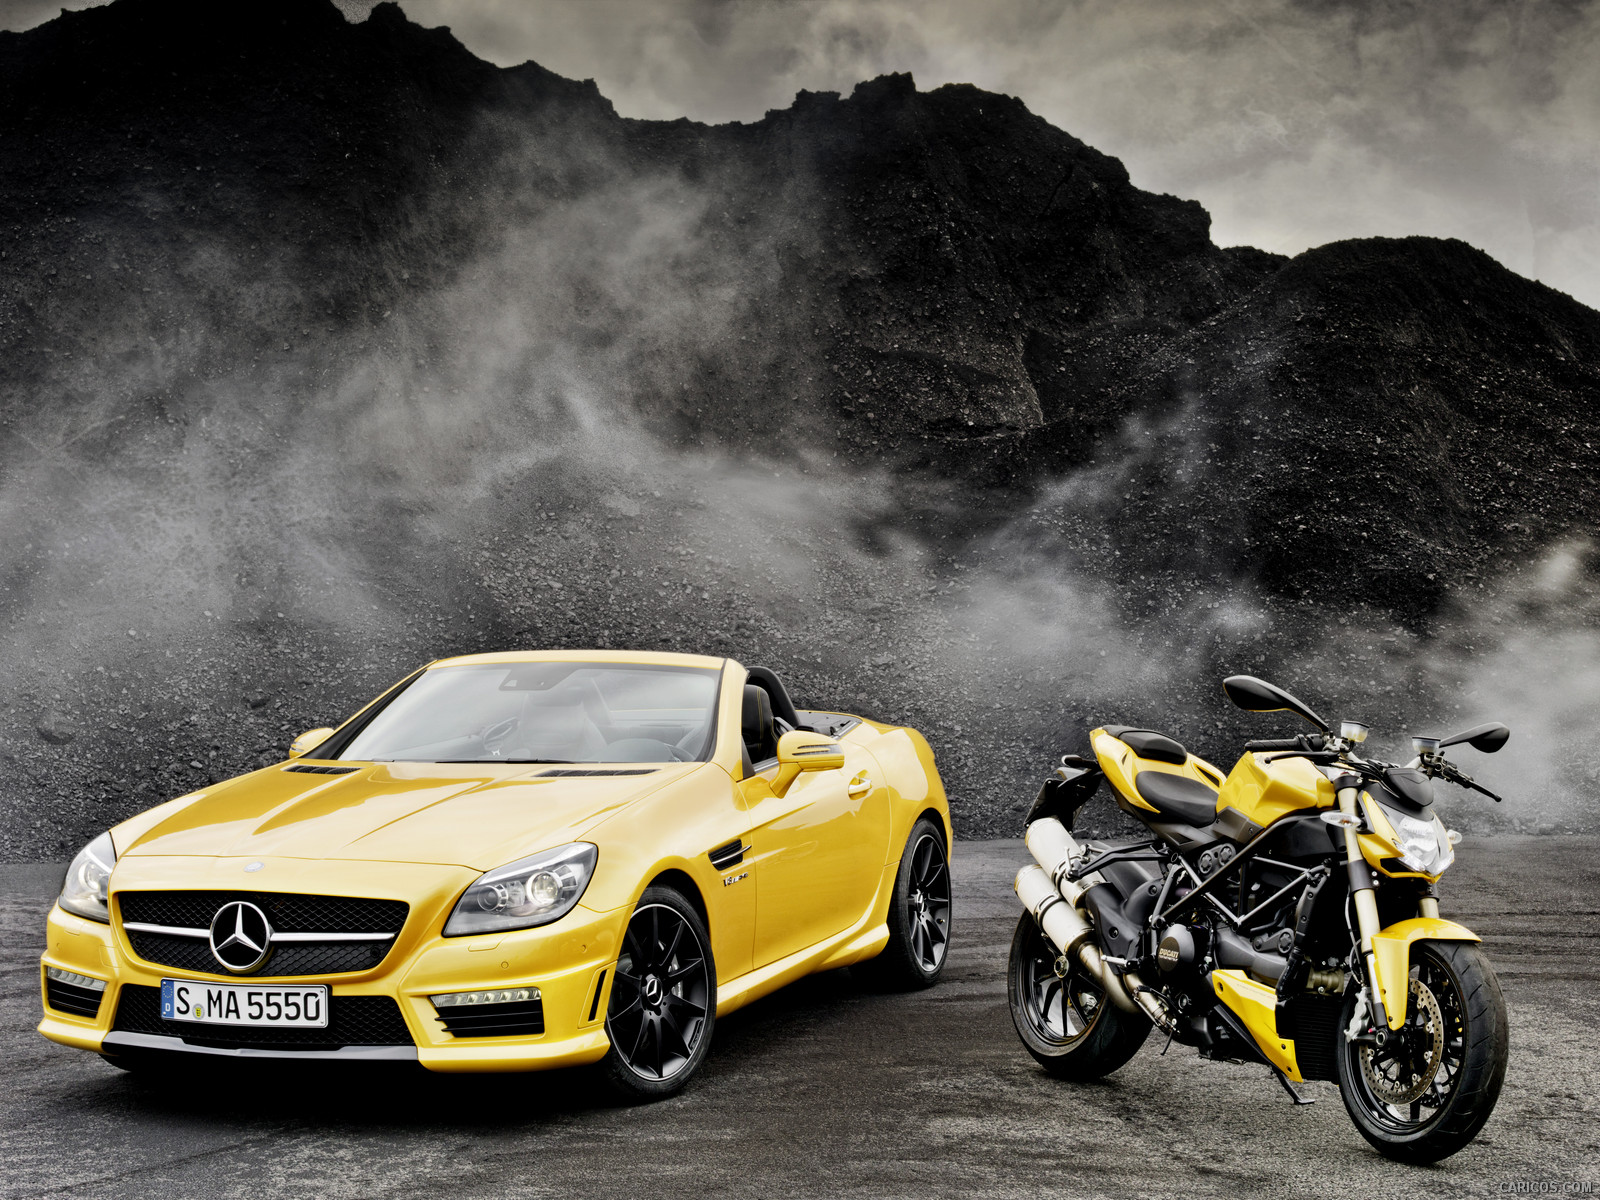 Mercedes-Benz SLK 55 AMG and Ducati Streetfighter 848 - , #47 of 47